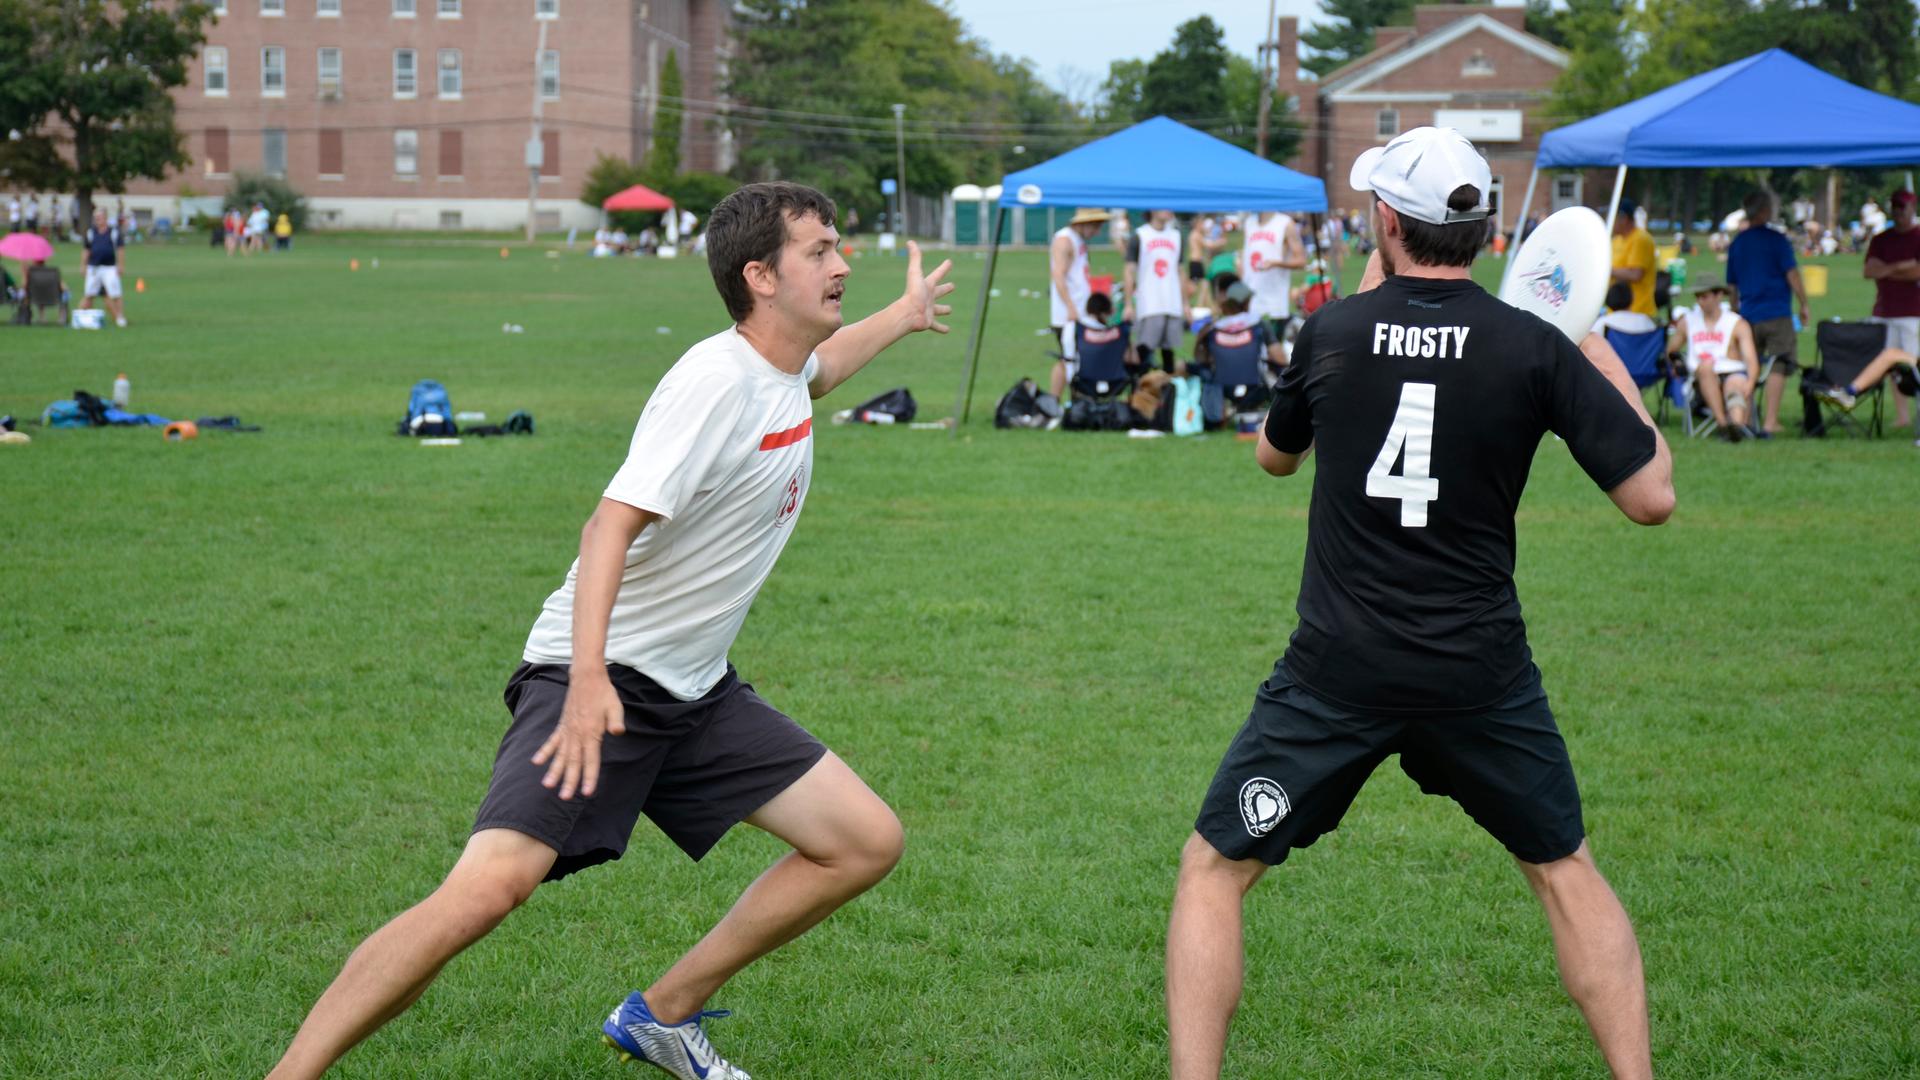 Alex Trahey, left, plays defense during a warm-up against a teammate. In mixed, men guard men, and women guard women.